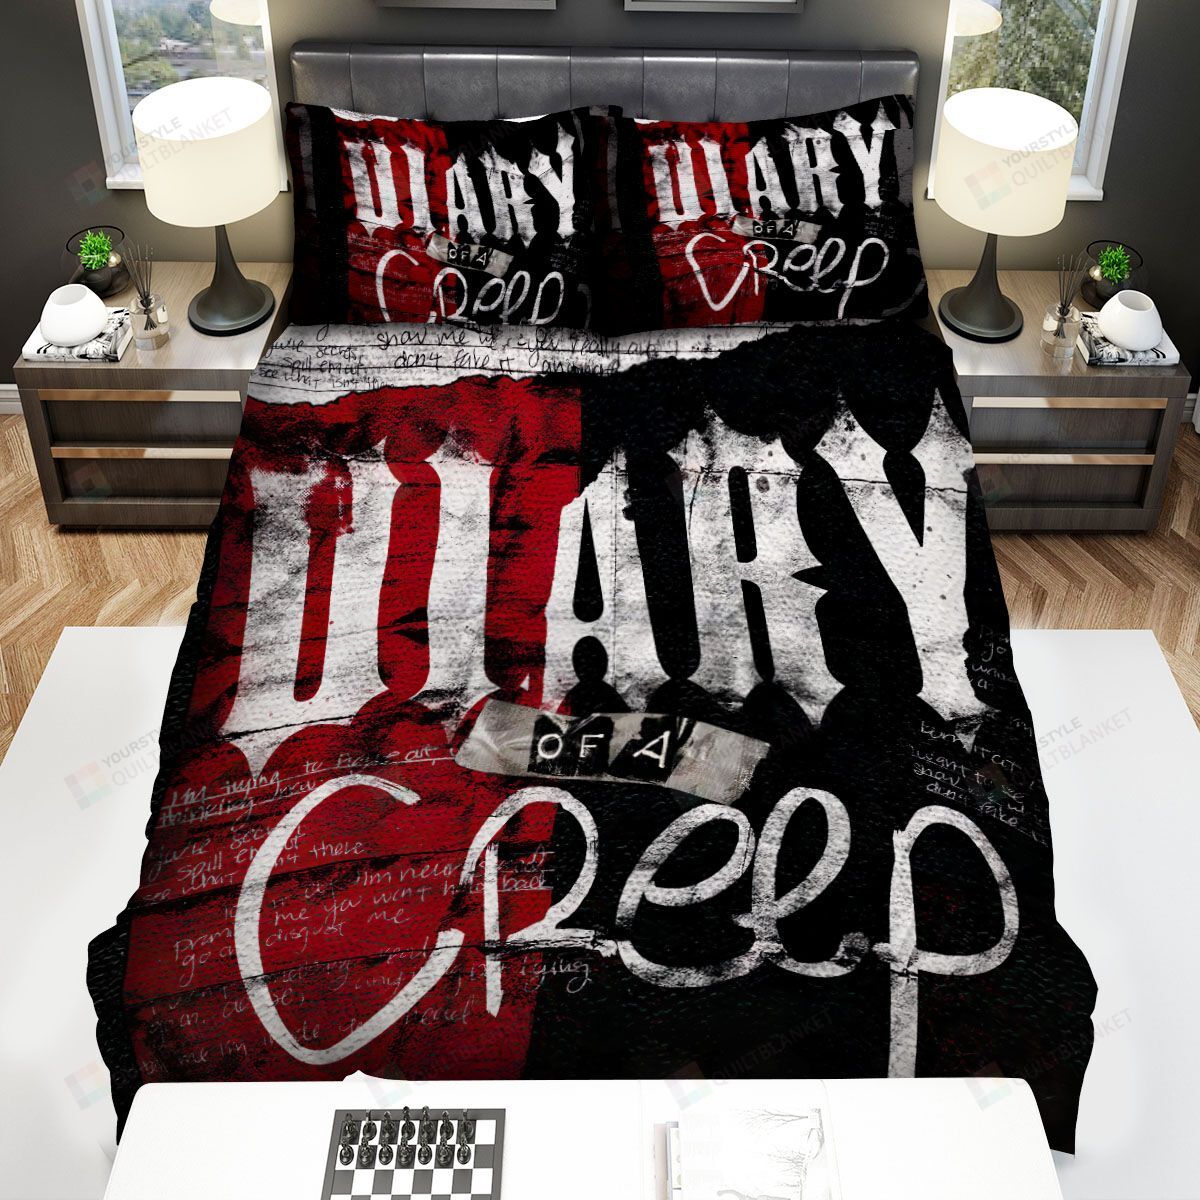 New Years Day Band Diary Of A Creep Album Cover Bed Sheets Spread Comforter Duvet Cover Bedding Sets